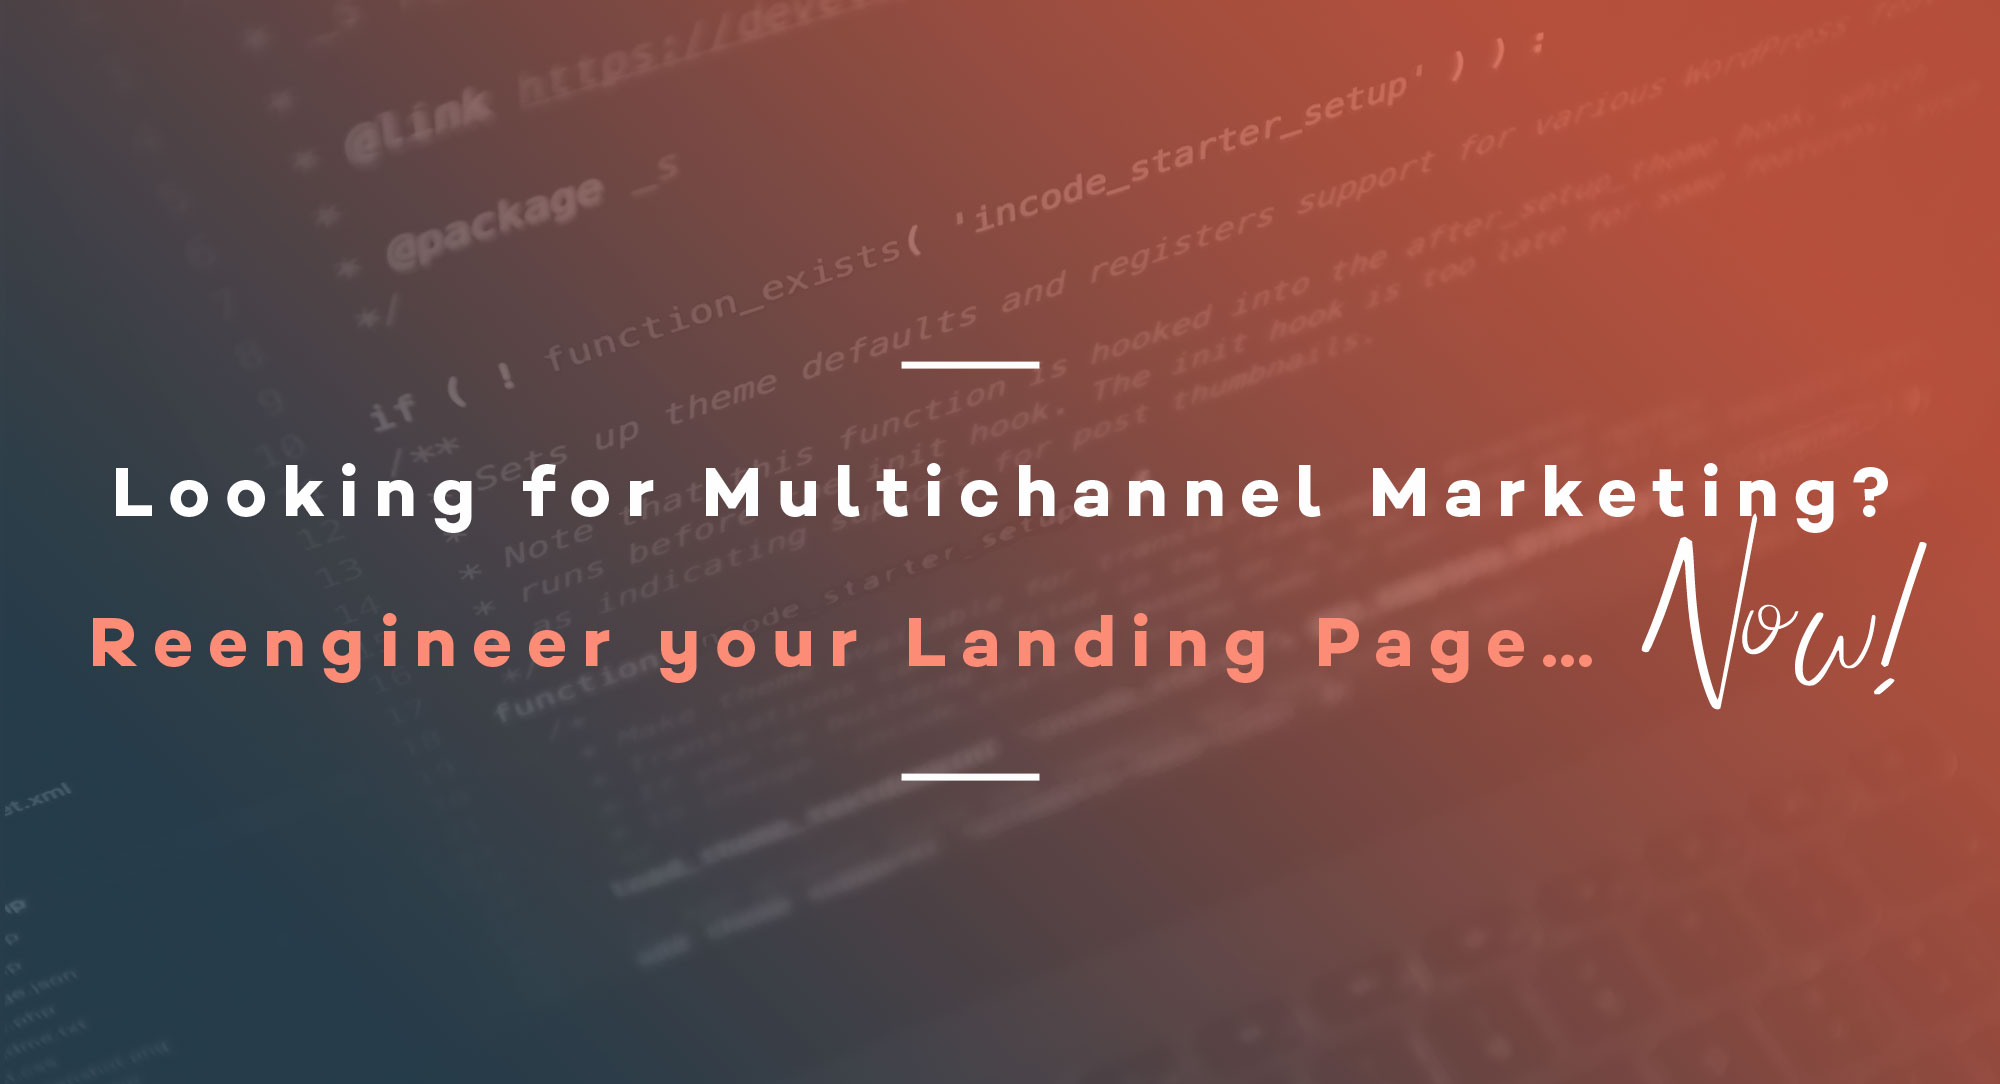 Looking for Multichannel Marketing Reengineer your Landing Page… Now!